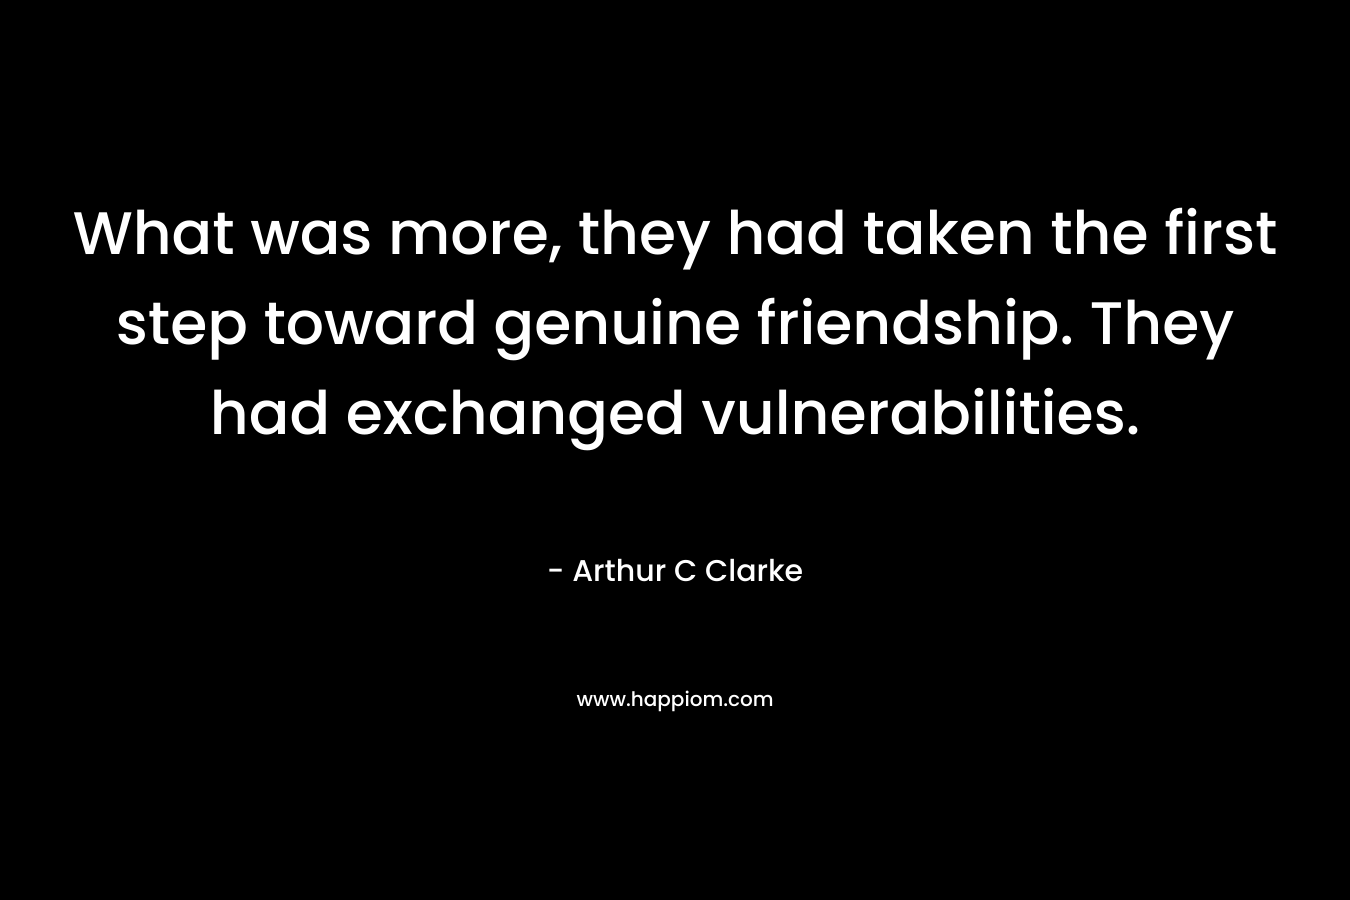 What was more, they had taken the first step toward genuine friendship. They had exchanged vulnerabilities. – Arthur C Clarke